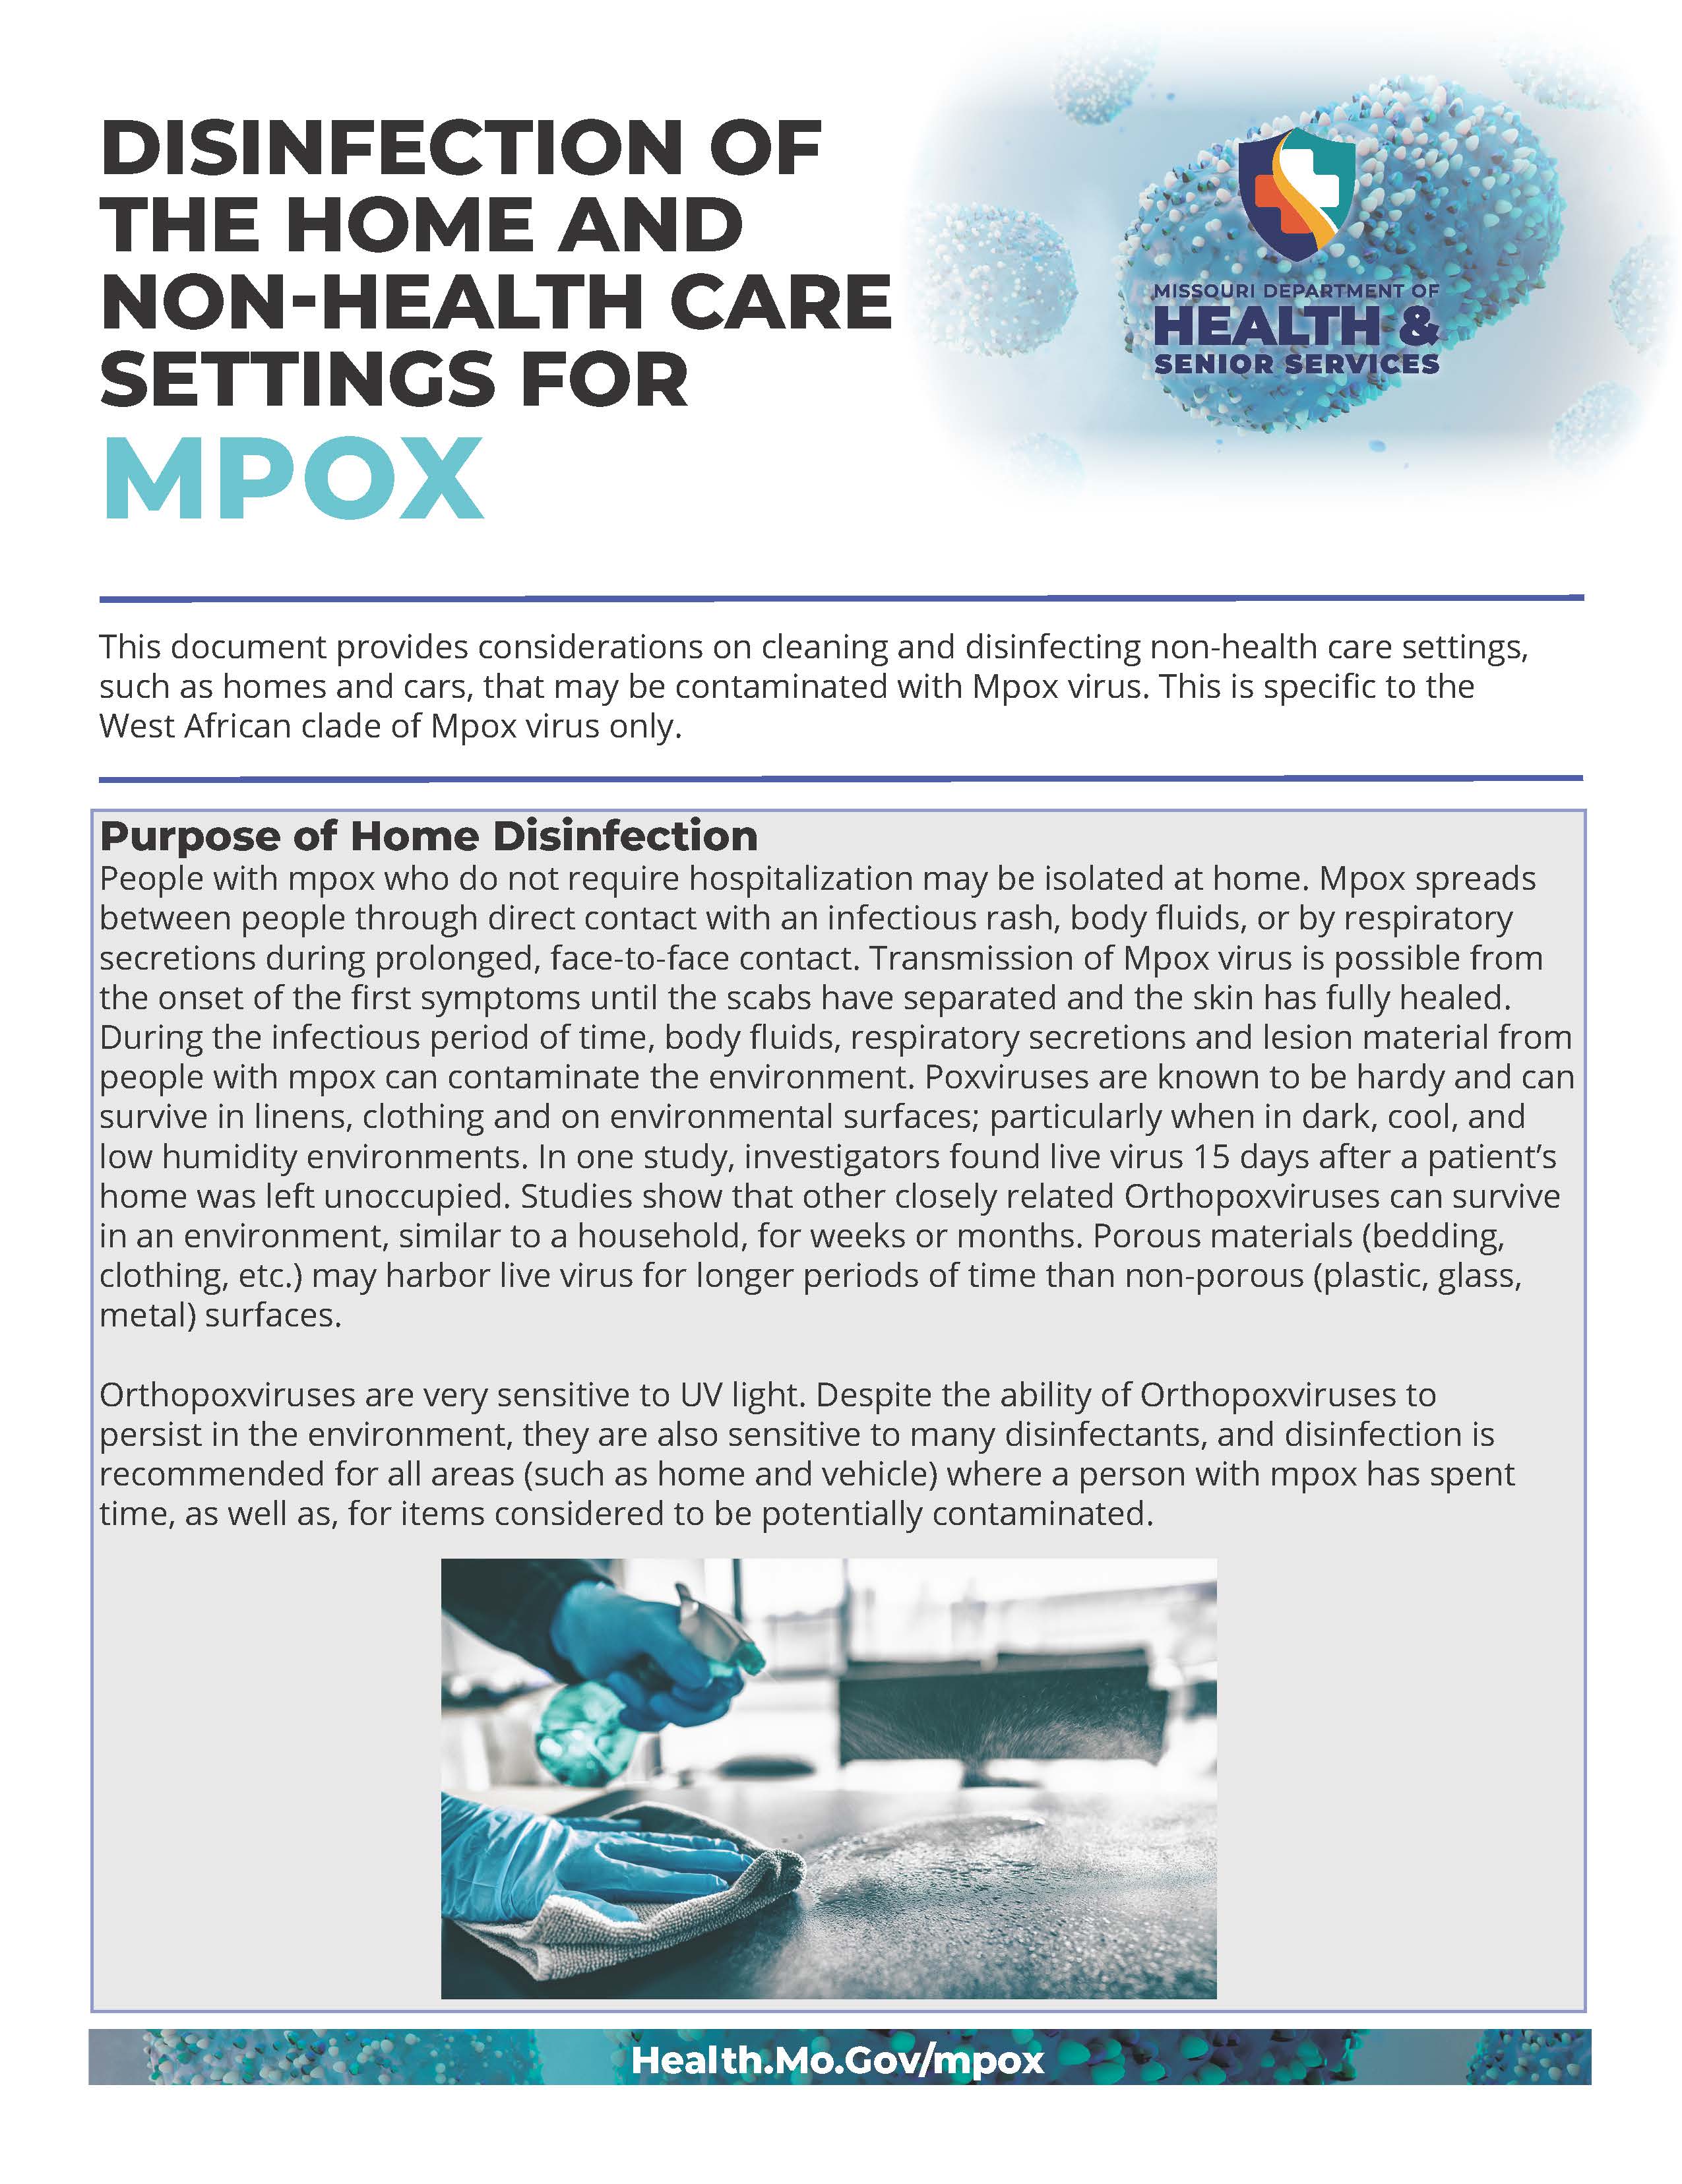 Disinfection of the Home and Non-Healthcare Settings